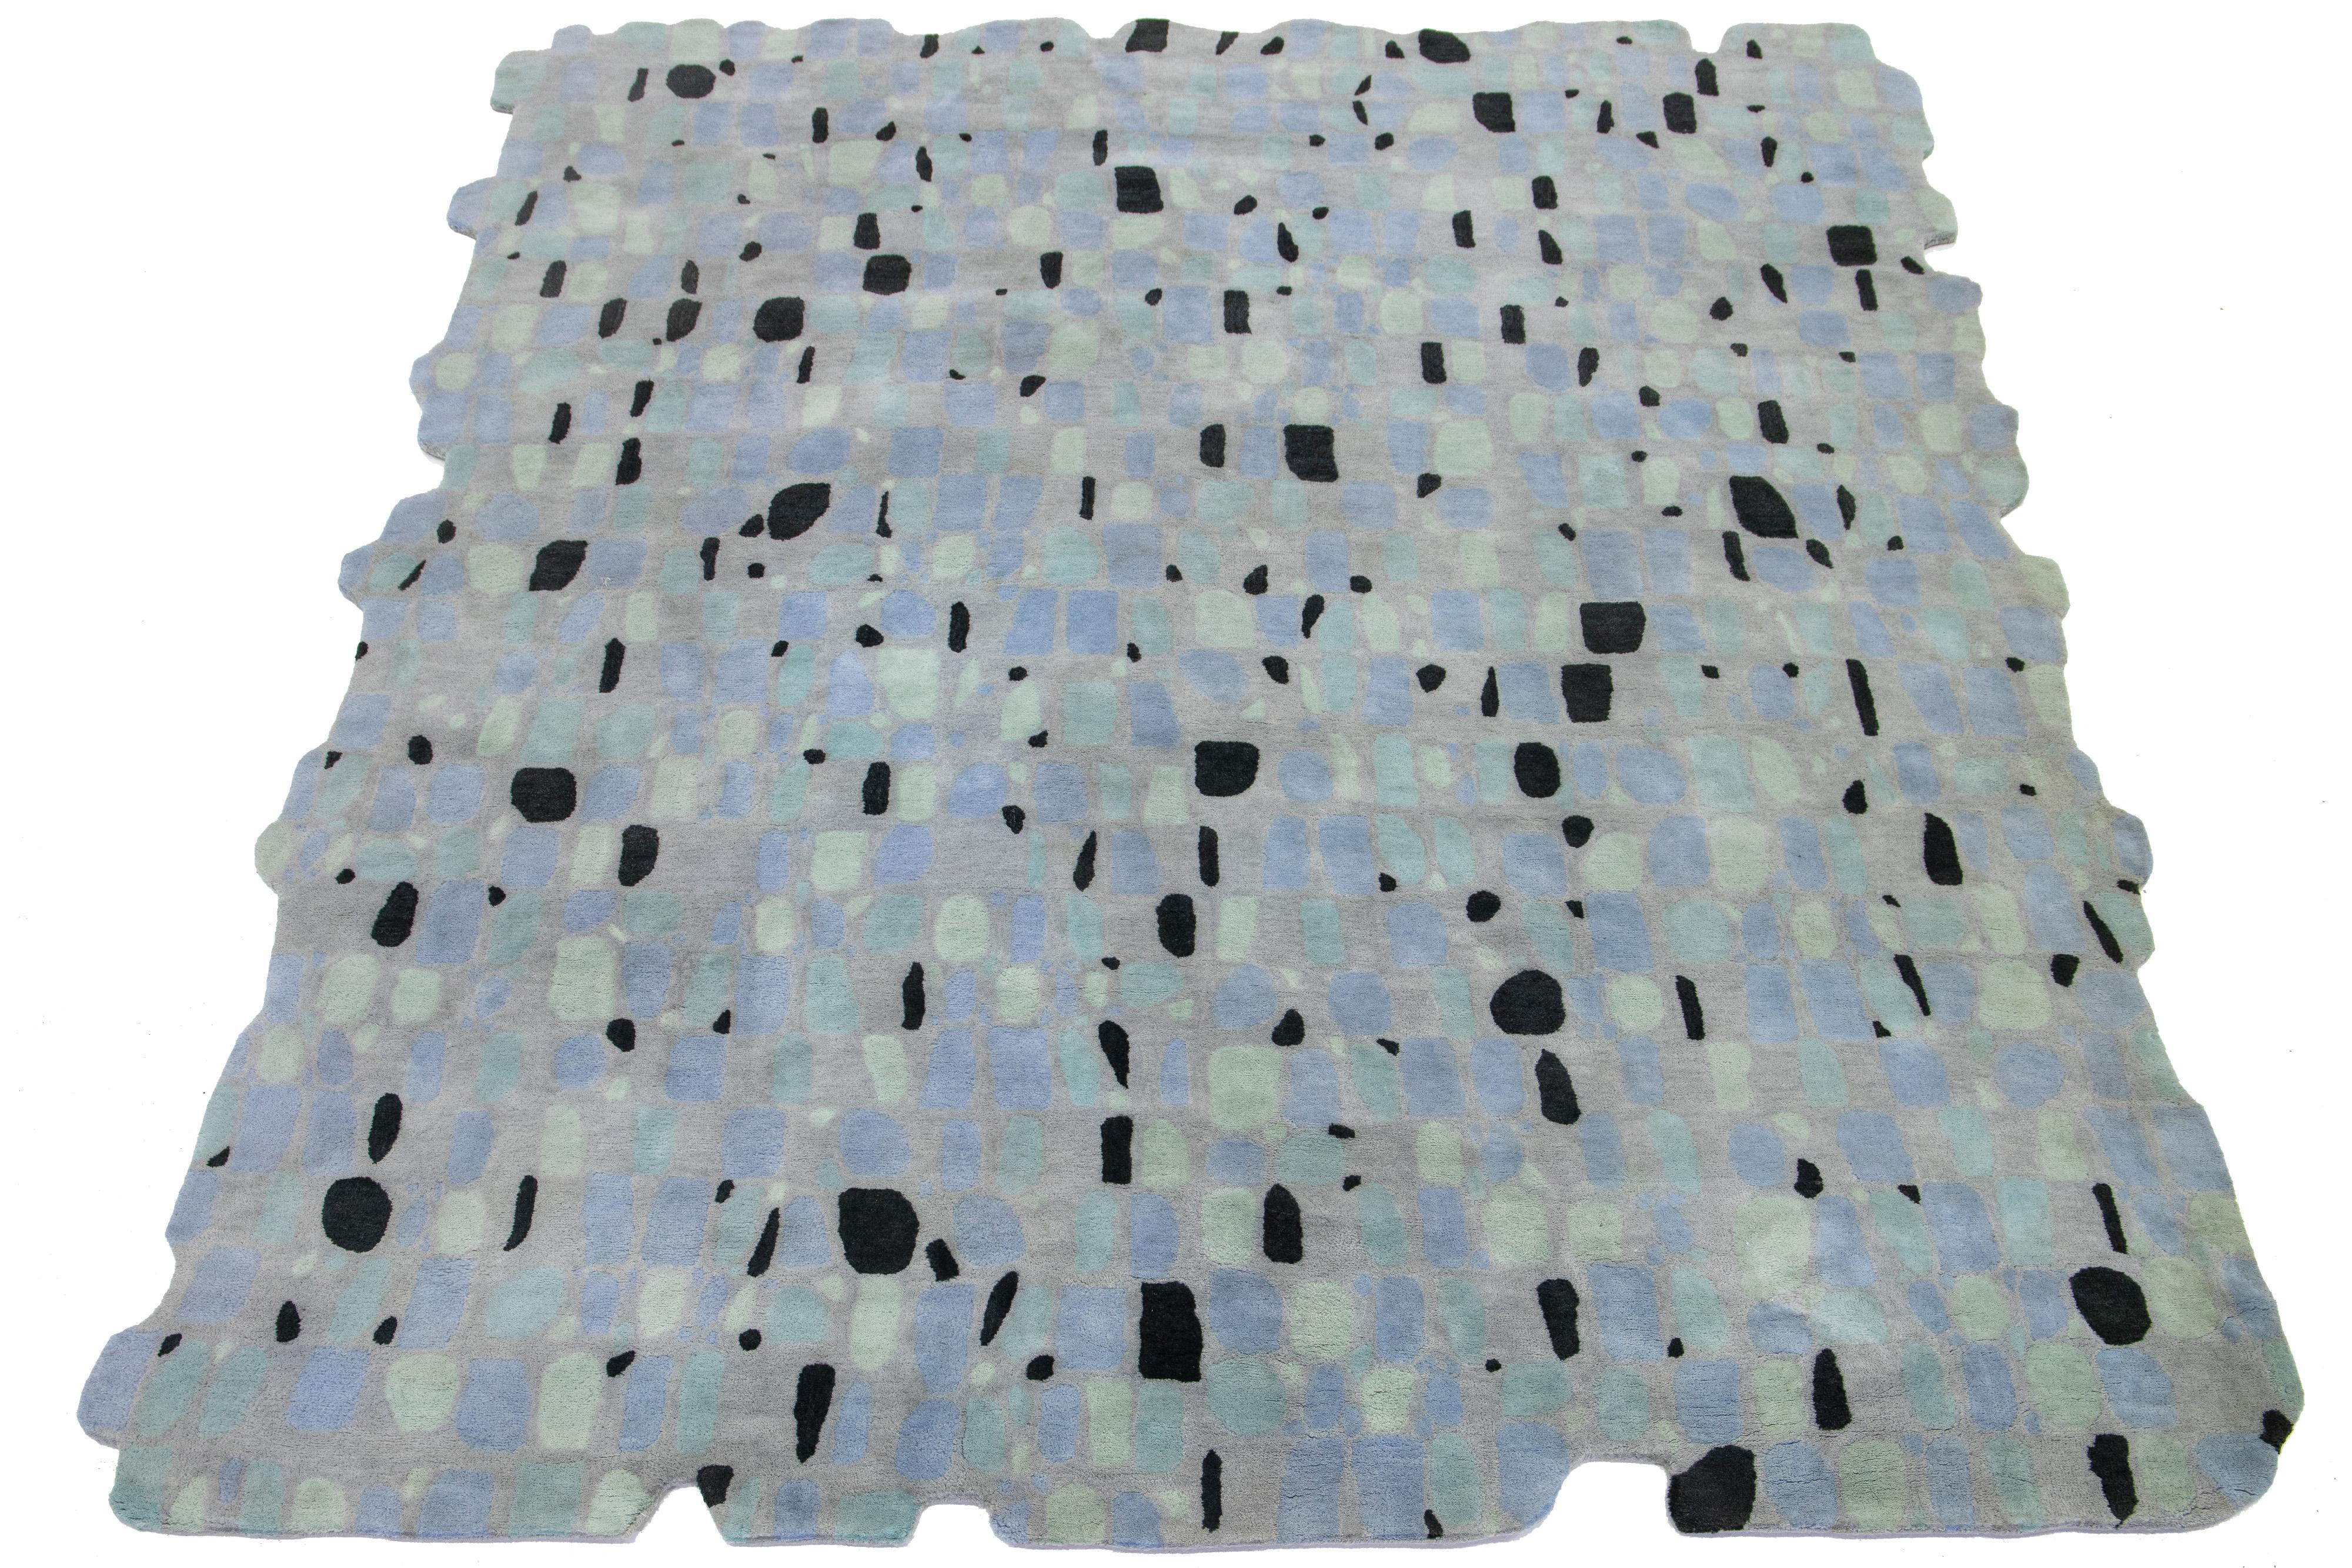 This beautiful, modern hand-tufted wool rug part of our Laura Gottwald for Apadana Collection features gray, black, blue, and green fields. This abstract design celebrates biomorphic form, as in Alvar Alto’s famous vase, Noguchi’s coffee
table,